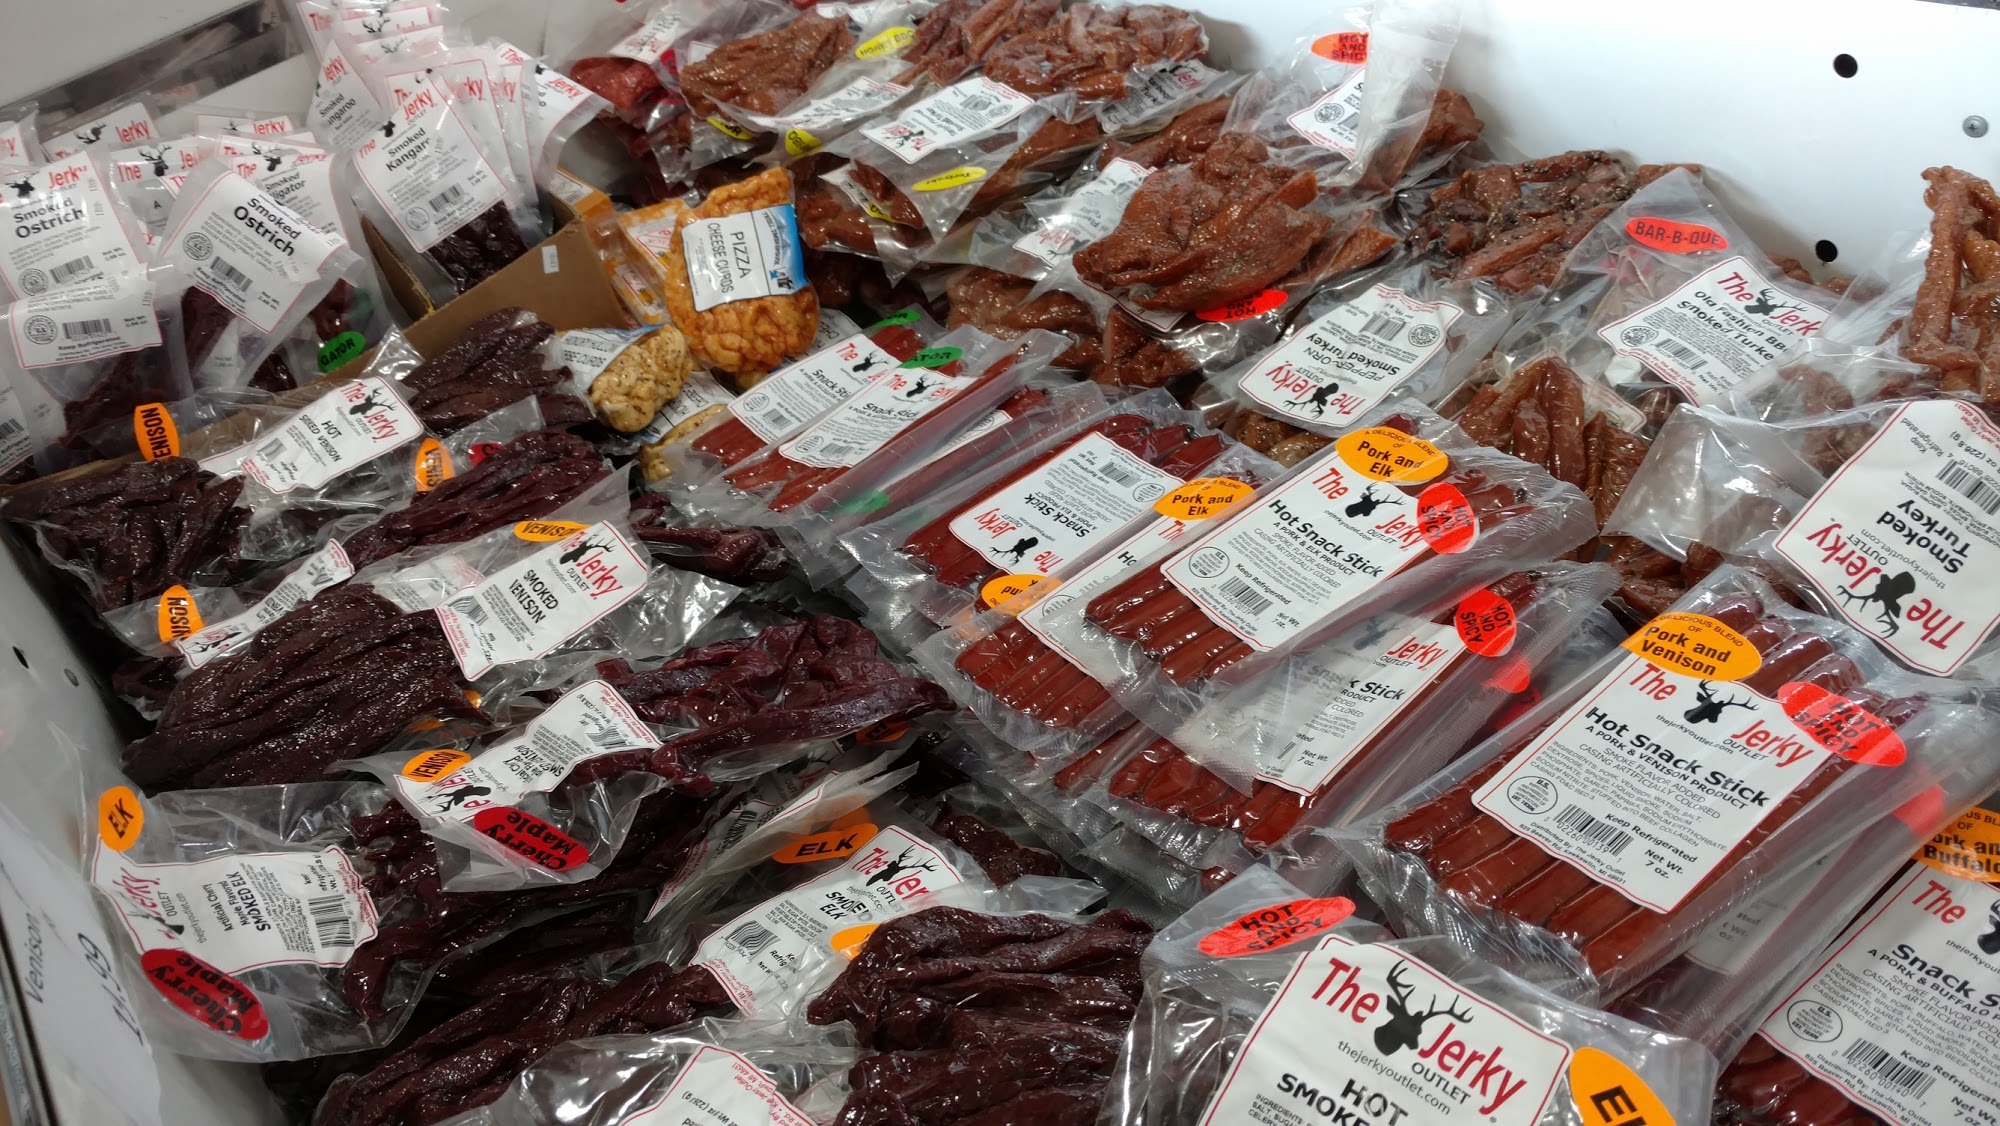 The Jerky Outlet